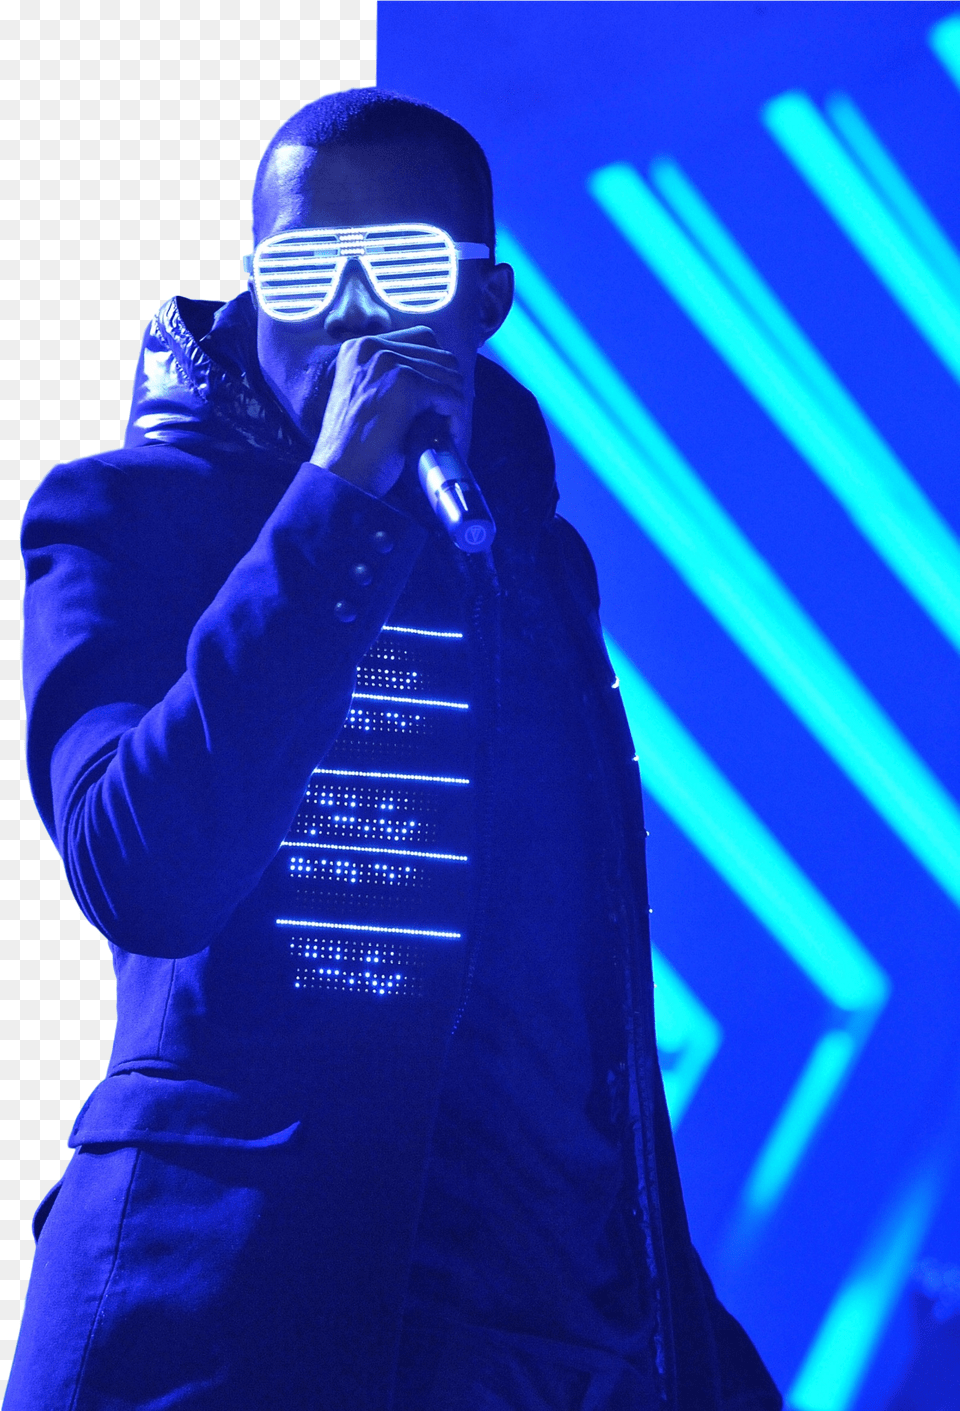 Getty Kanye West Glow In The Dark Png